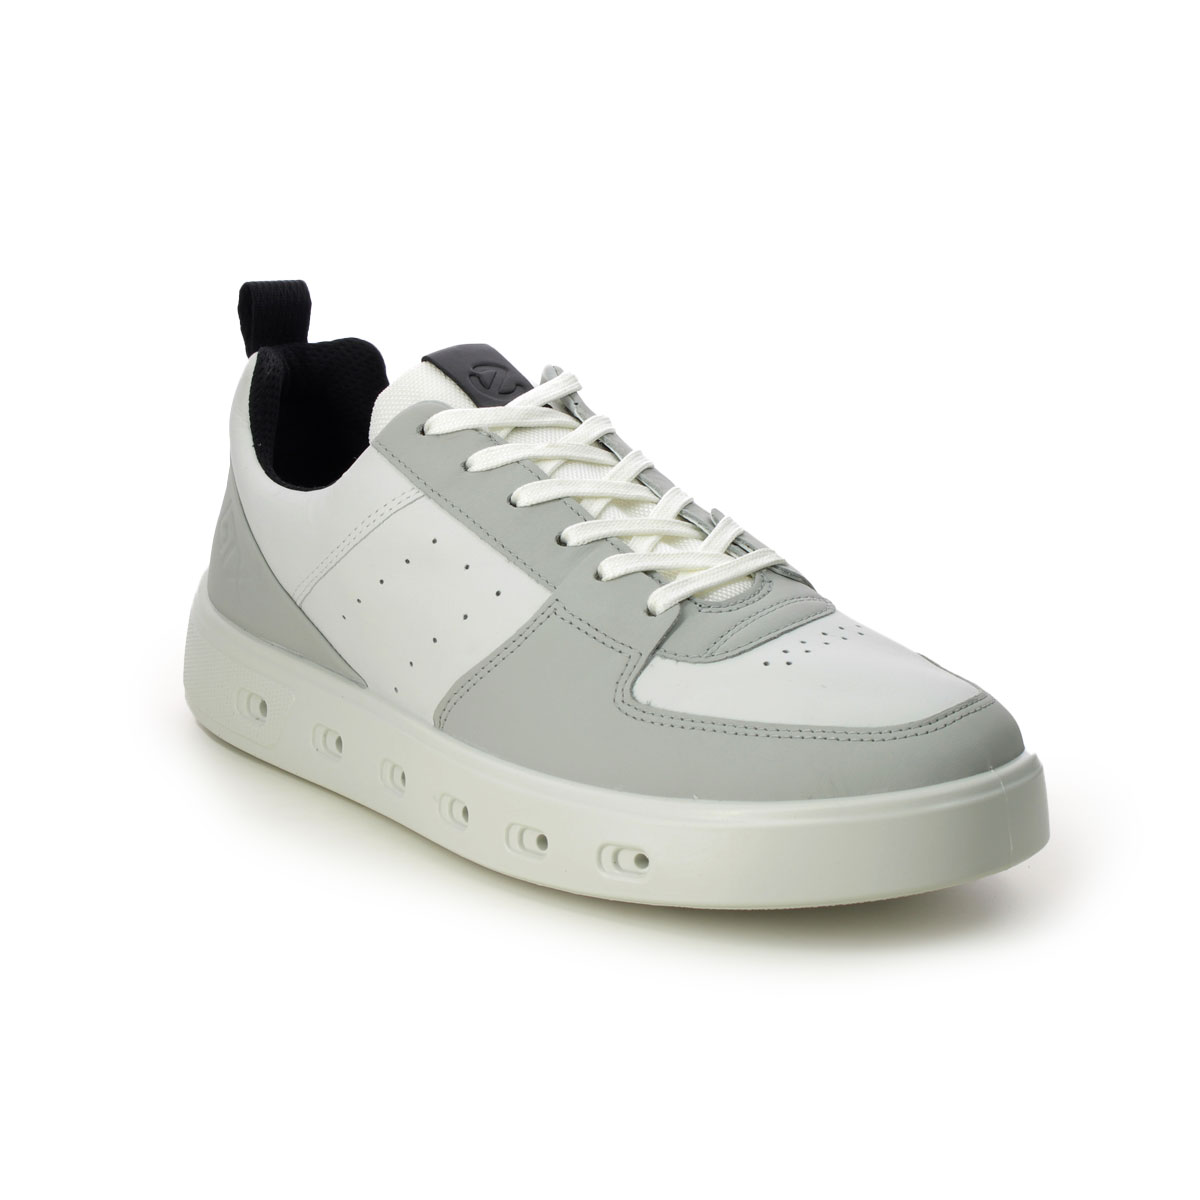 ECCO Street 720 Gtx Grey Mens trainers 520814-54301 in a Plain Leather in Size 46